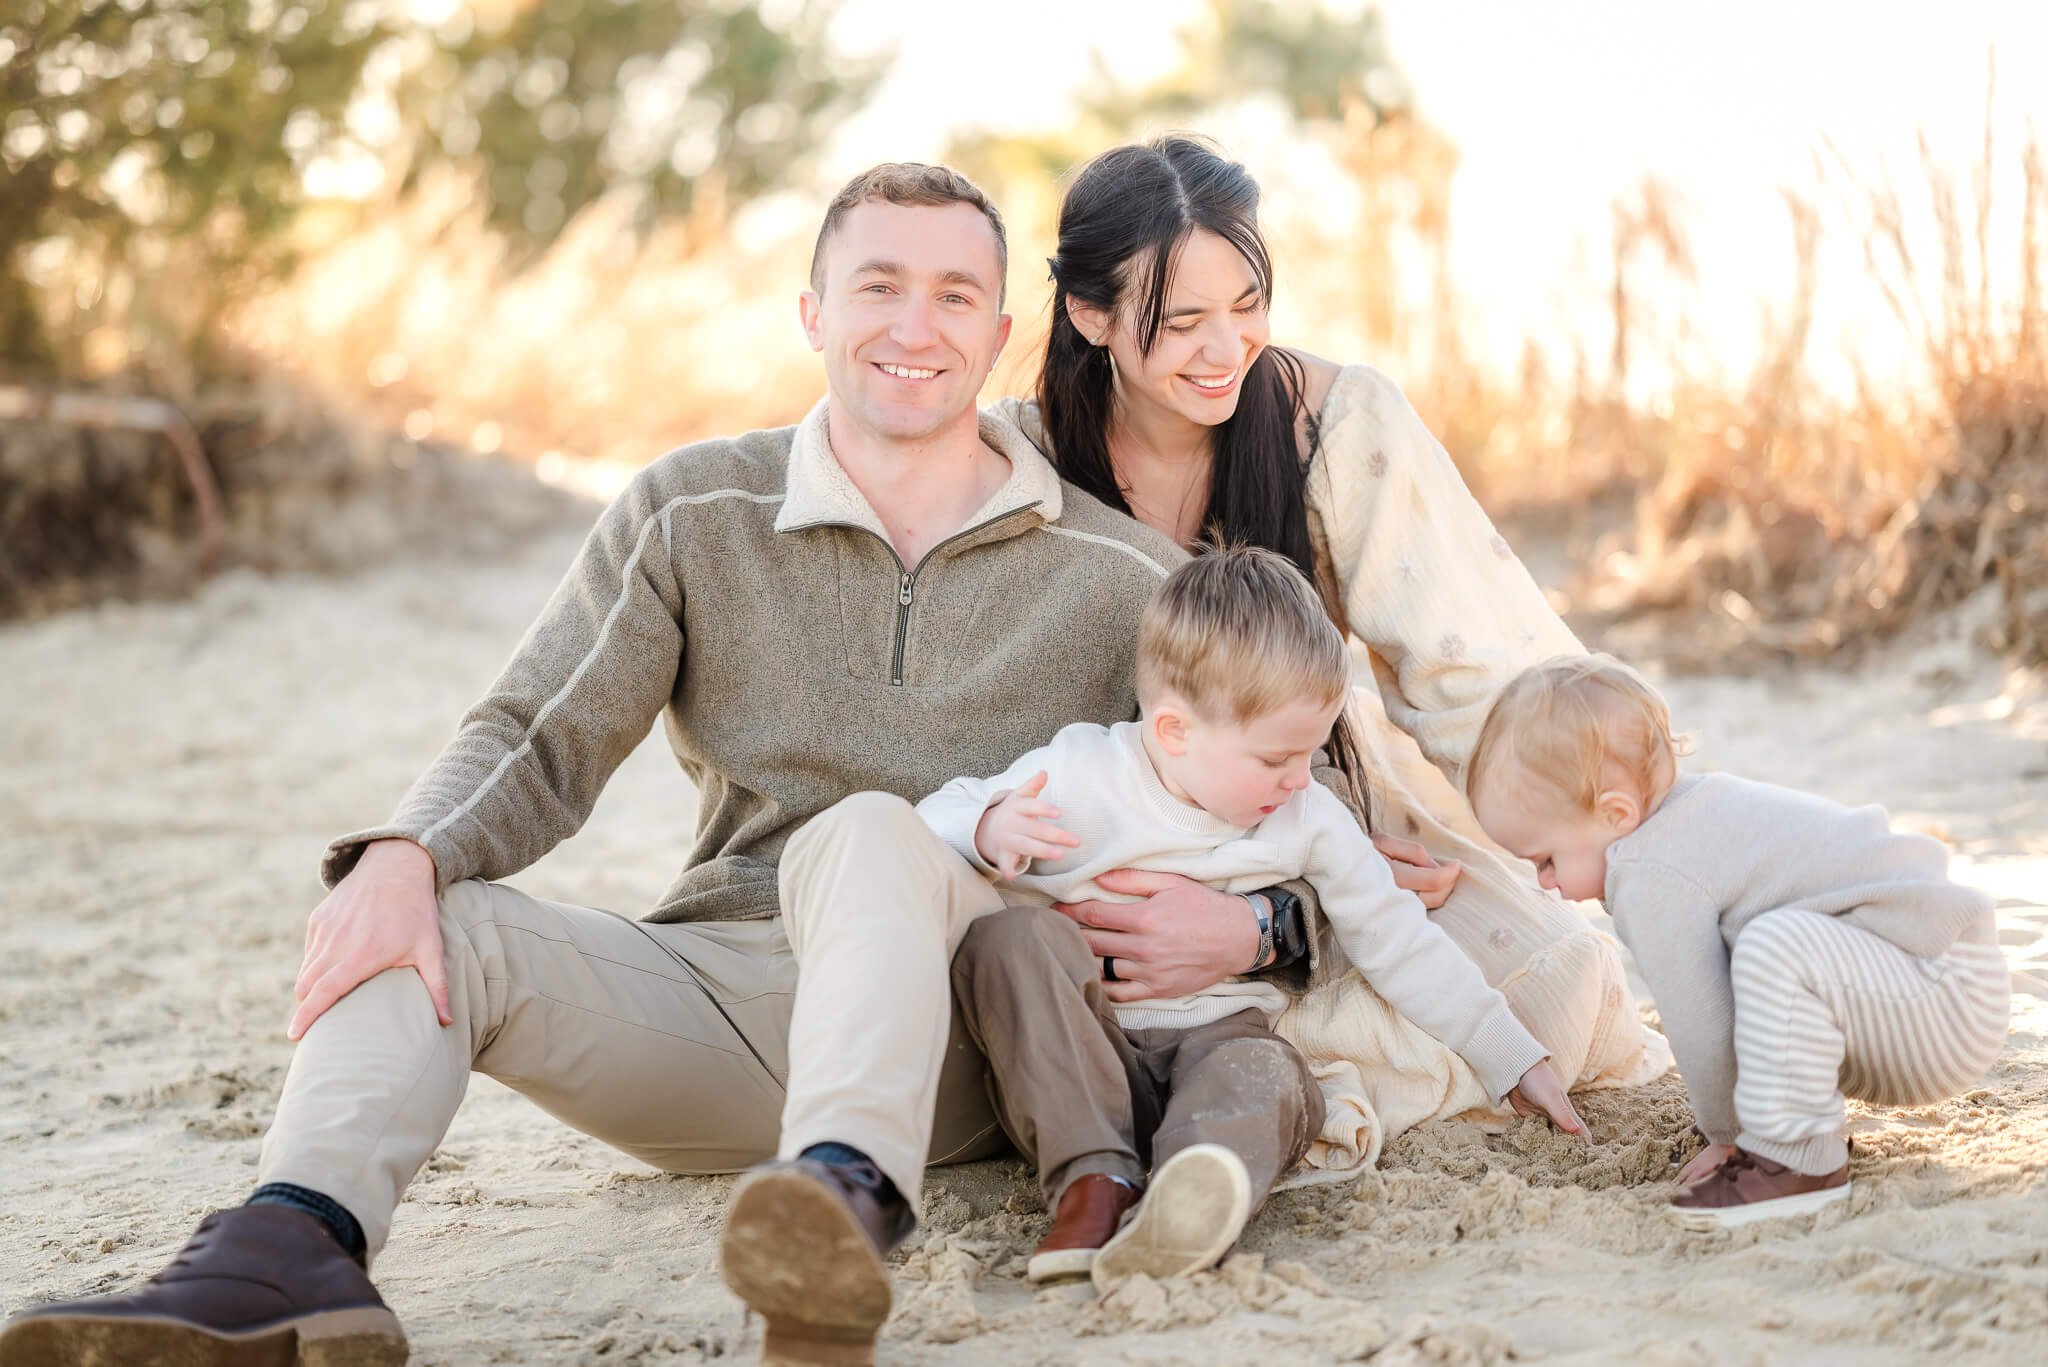 A family of two parents and two young boys plays in the sand. The boys neutral outfits can be found in stores like Little Peas Children's Boutique in Chesapeake, VA.